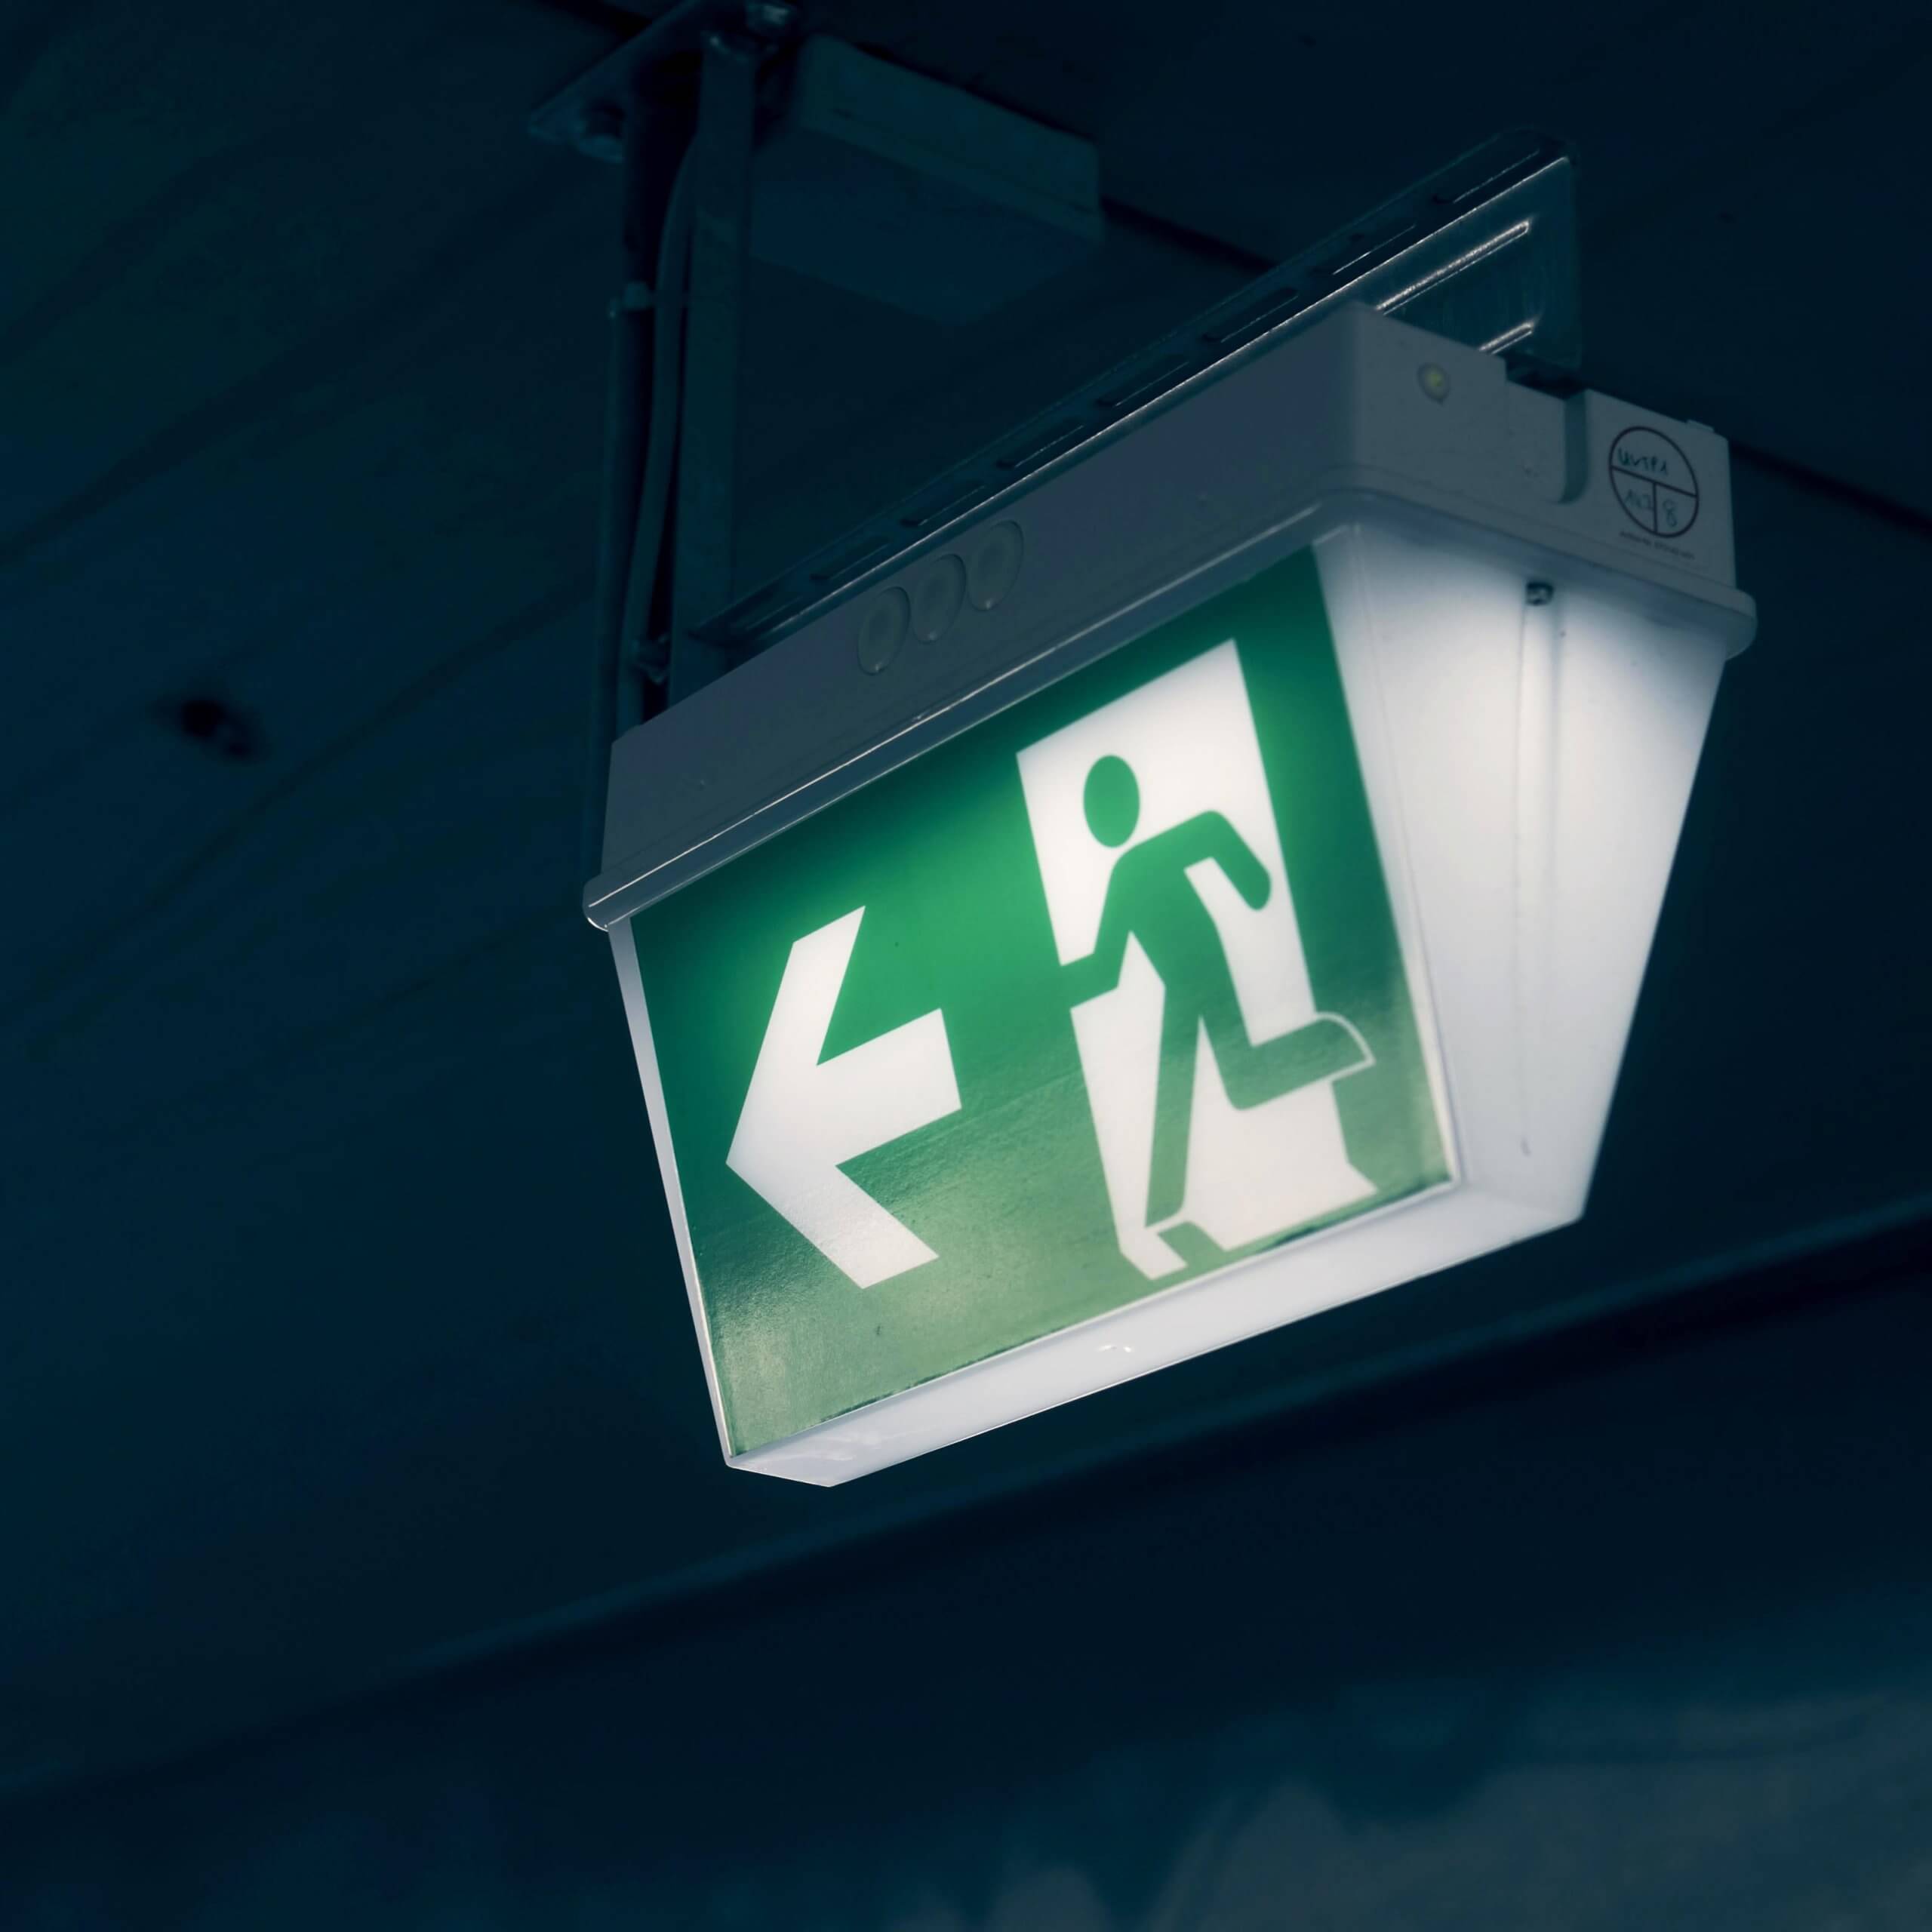 An image of a emergency exit sign, a visual metaphor for the topic of this piece What if a player wants out? Jordan Henderson in Saudi Arabia